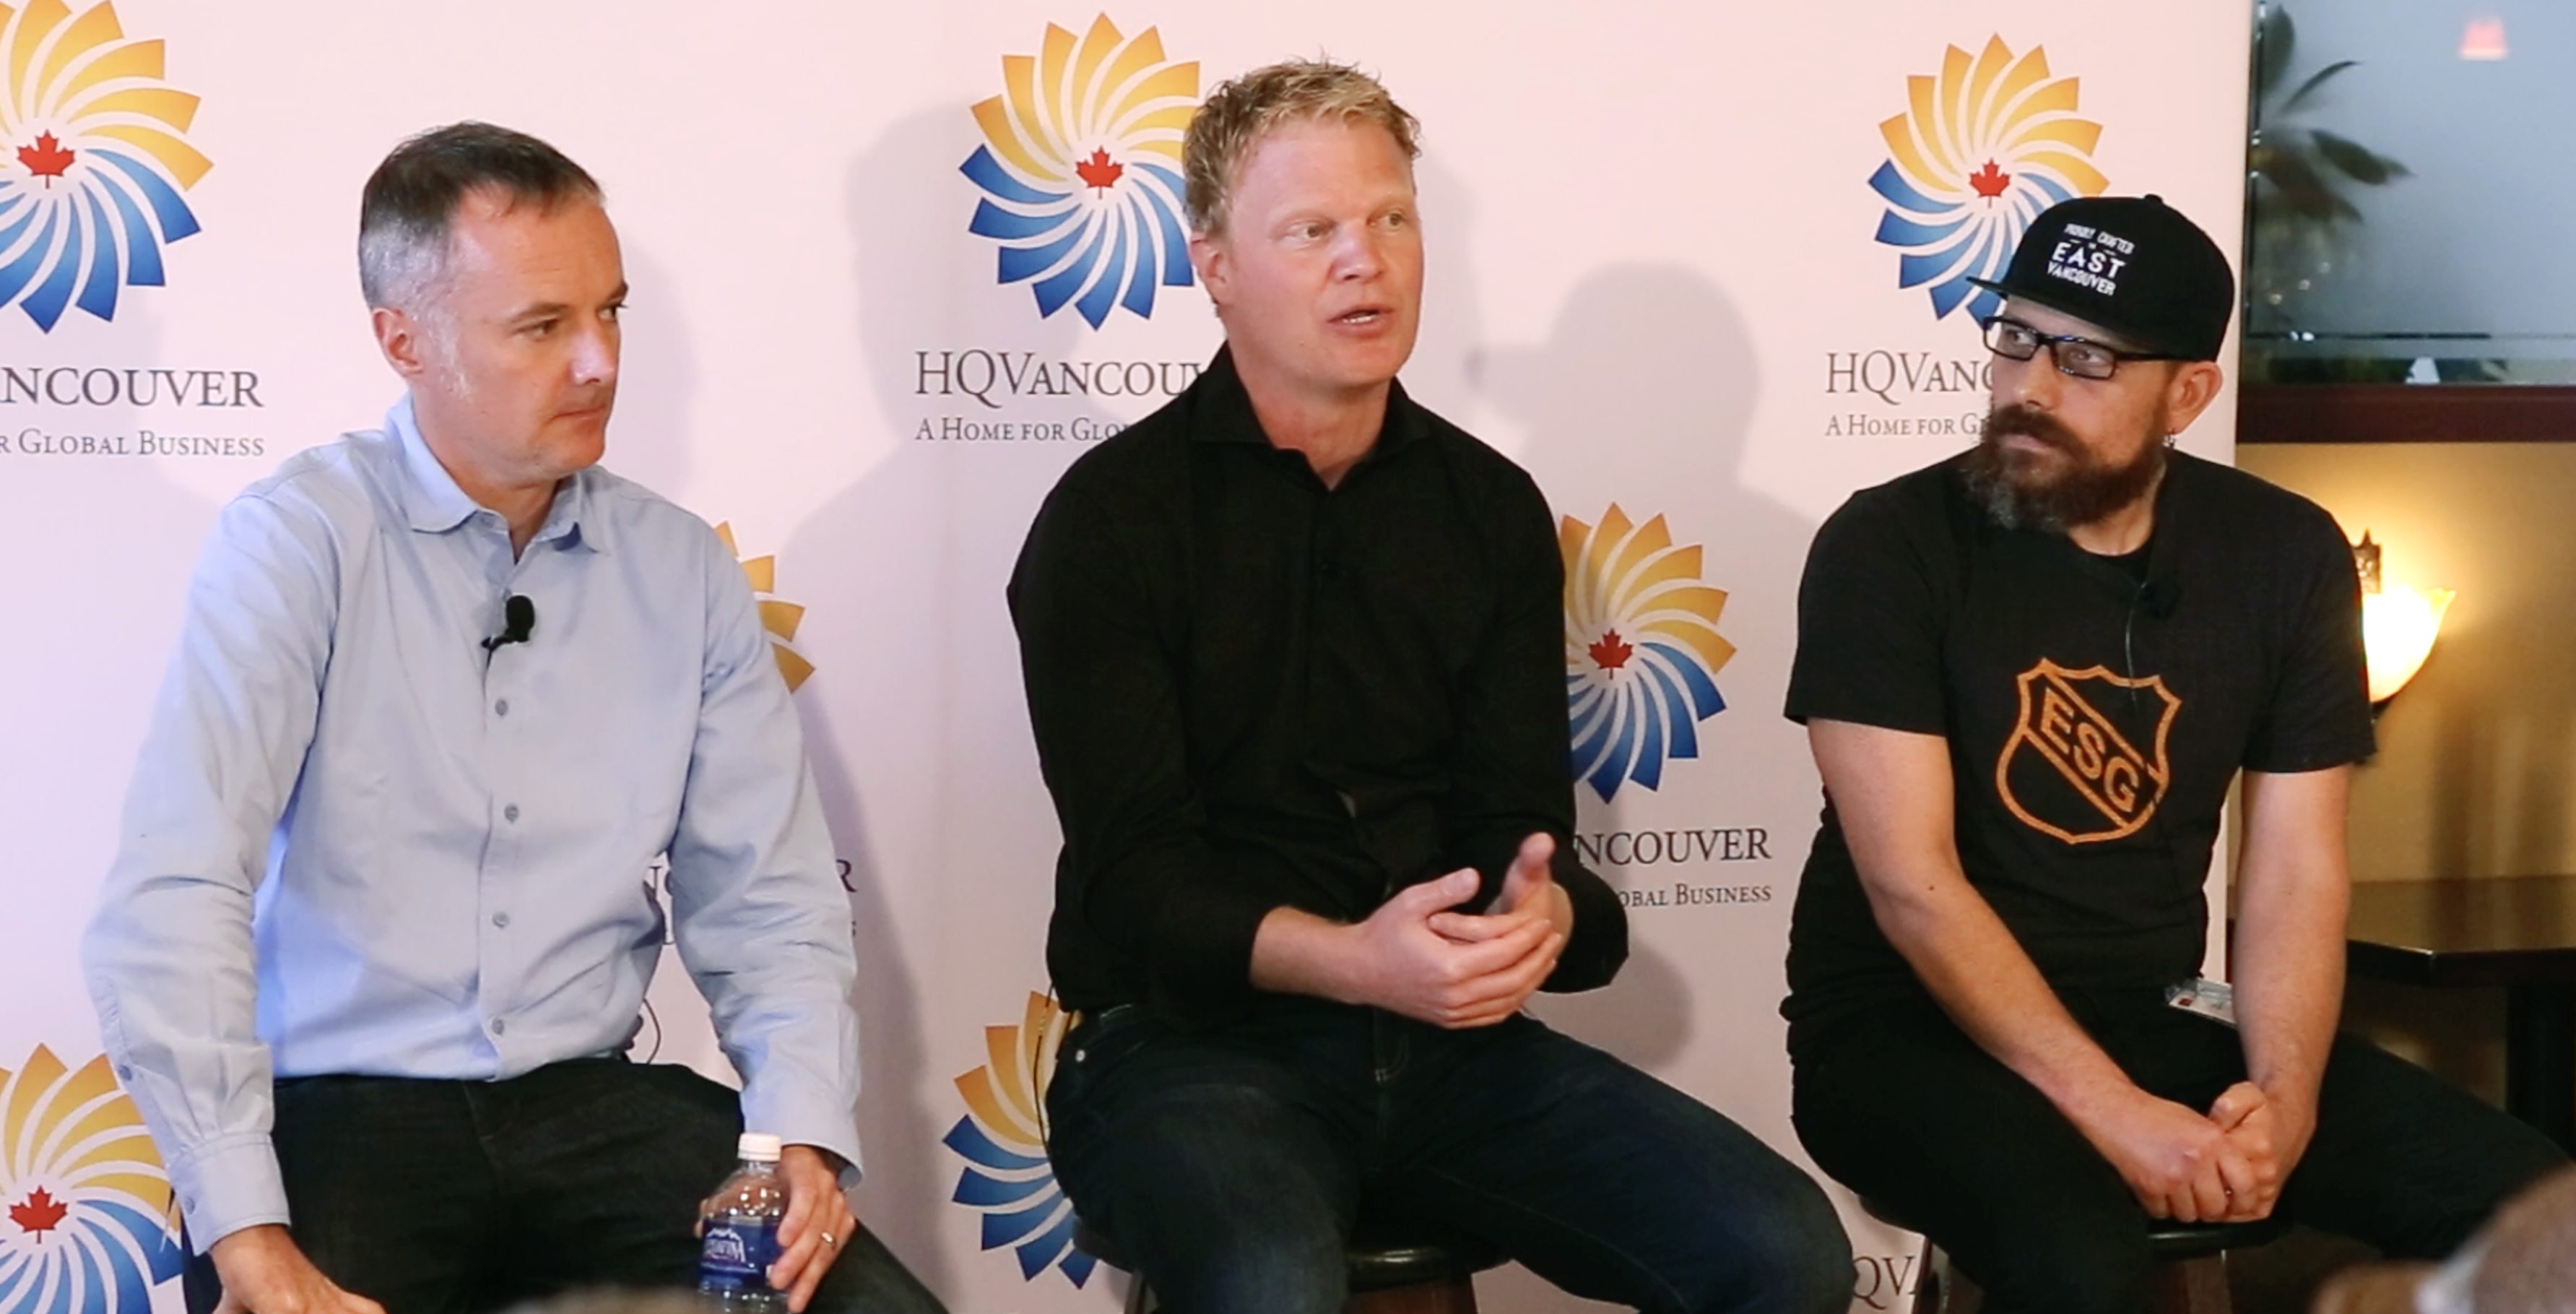 From left to right: Jon Lutz, VP, Financial Planning & Strategy at Electronic Arts (EA), Justin Dowdeswell, General Manager of Relic Entertainment, and Josh Nilson, CEO & Co-Founder of East Side Games. 